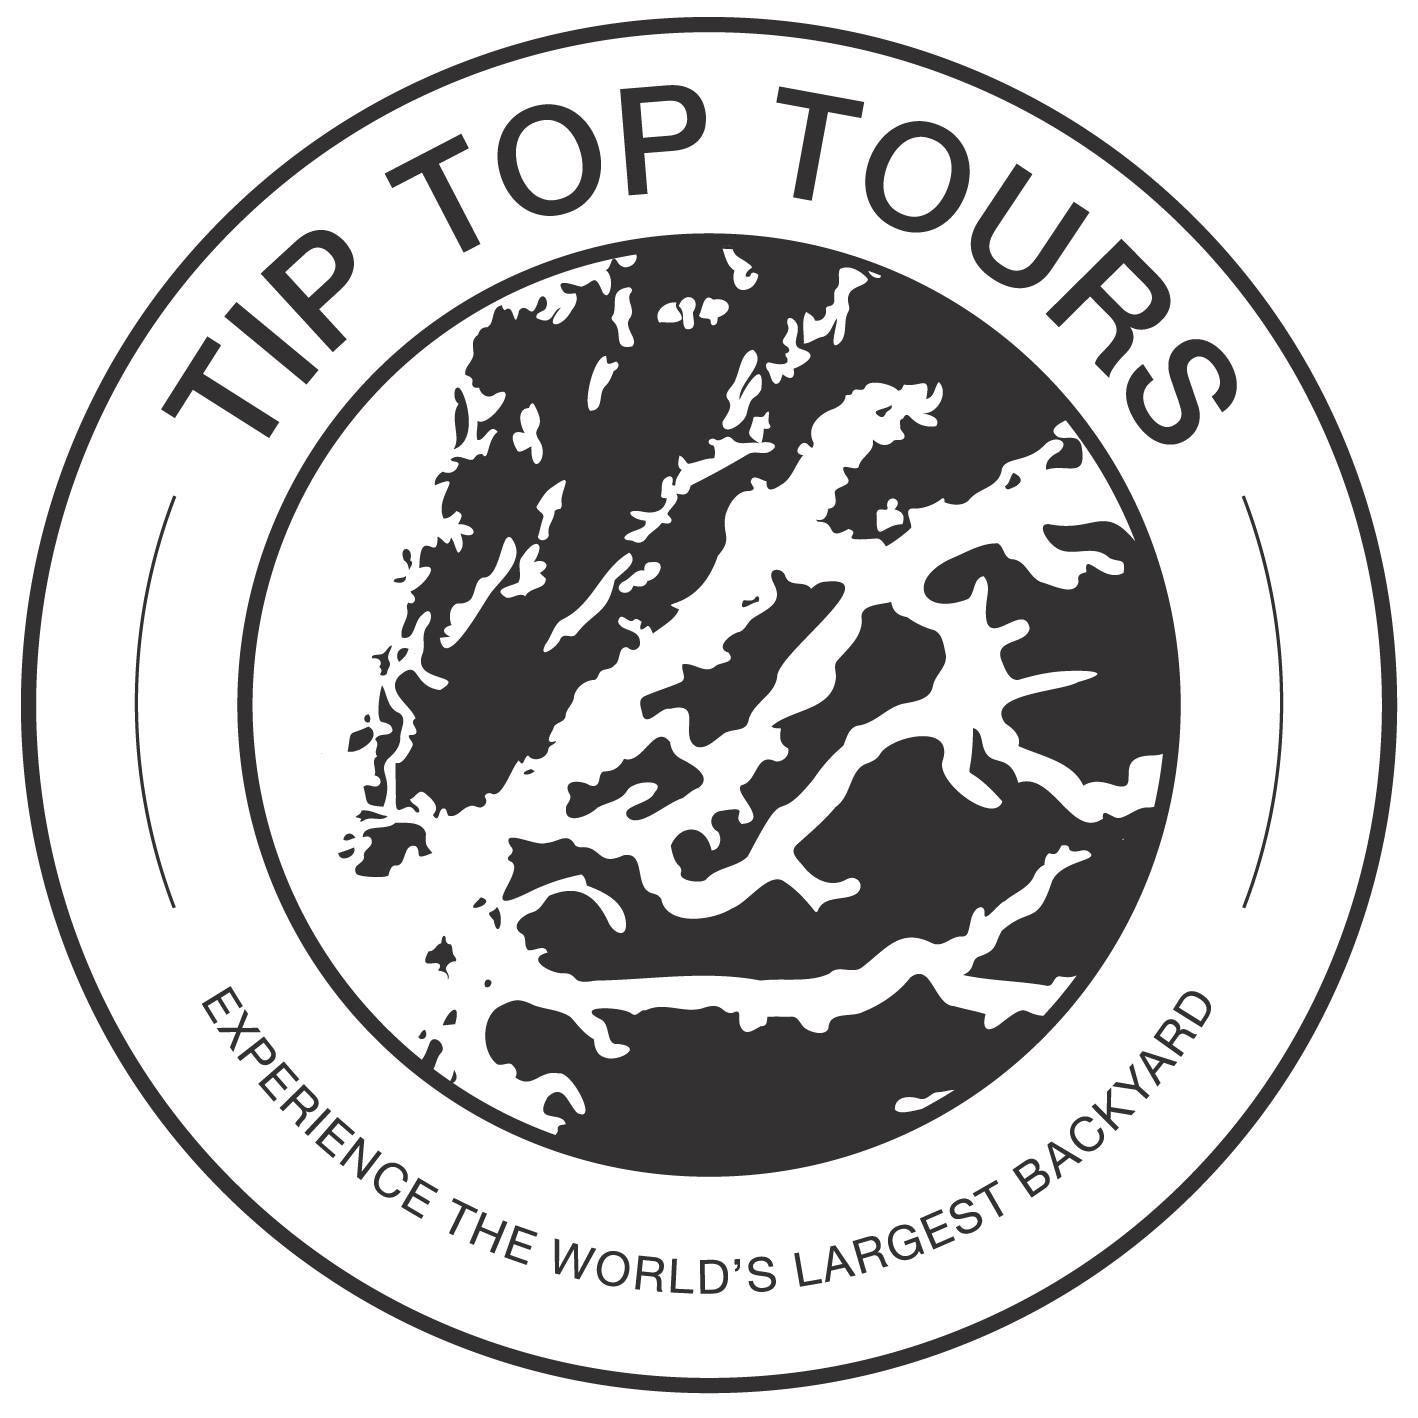 Tip Top Tours logo - Tip Top Tours photo archive